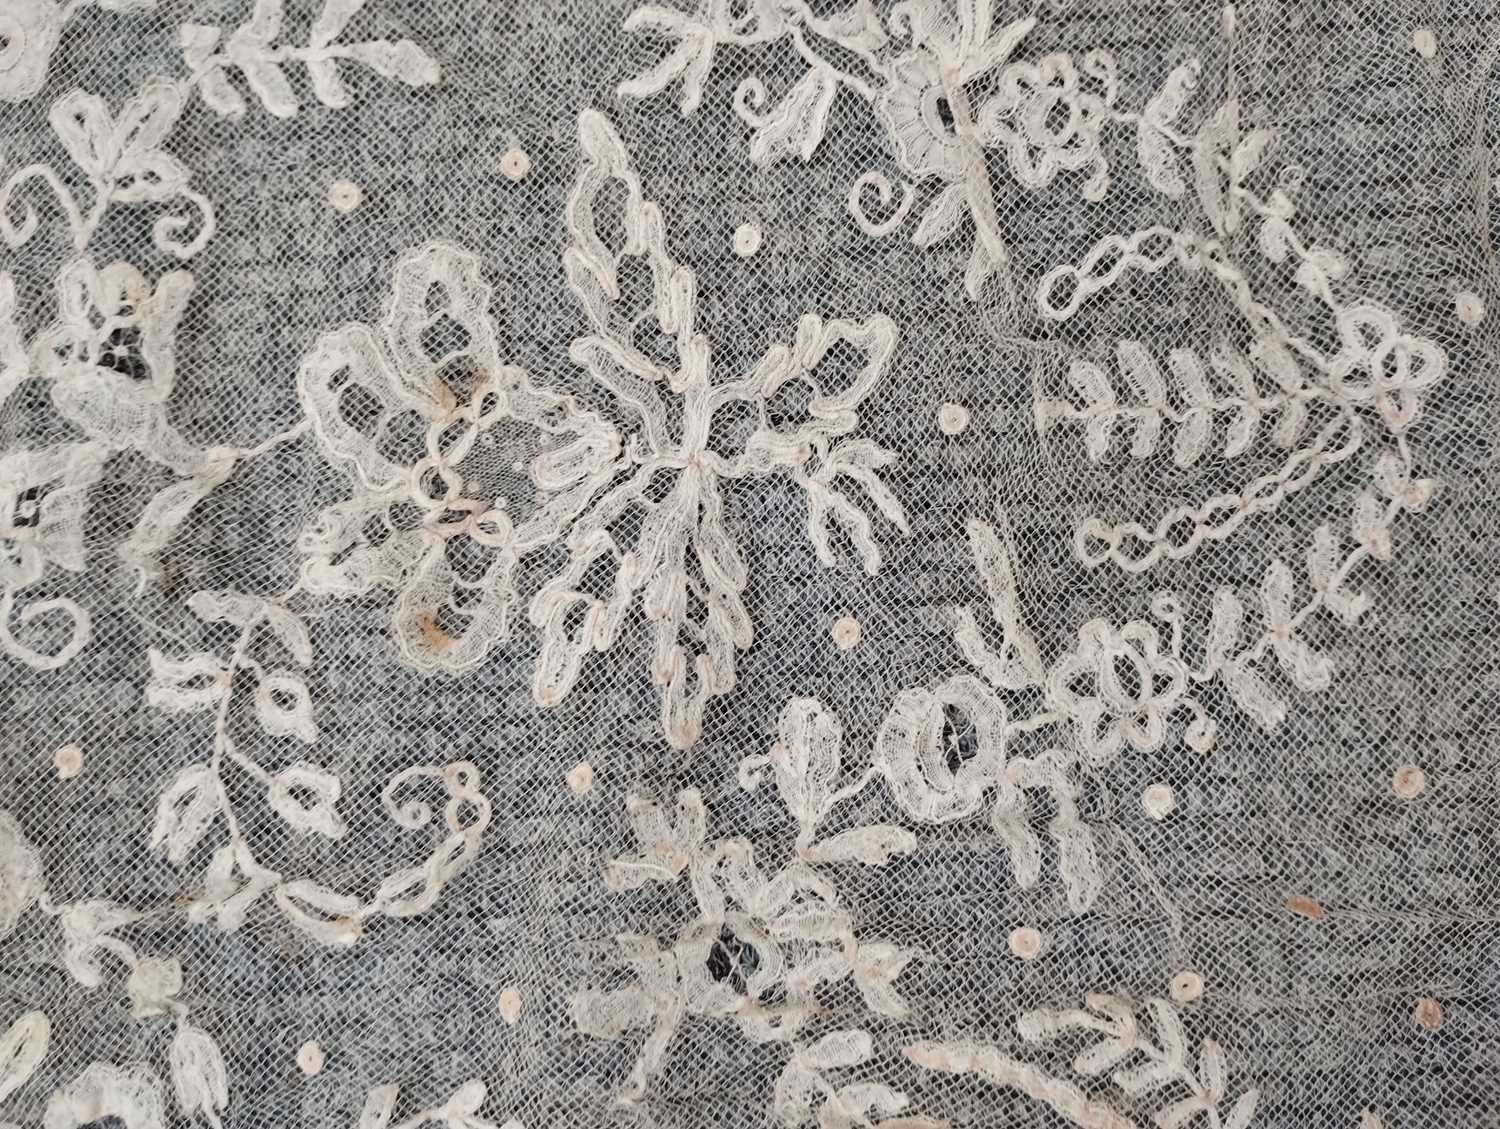 Early 20th Century Lace comprising a flounce with appliquéd flower heads and motifs within a - Image 32 of 32